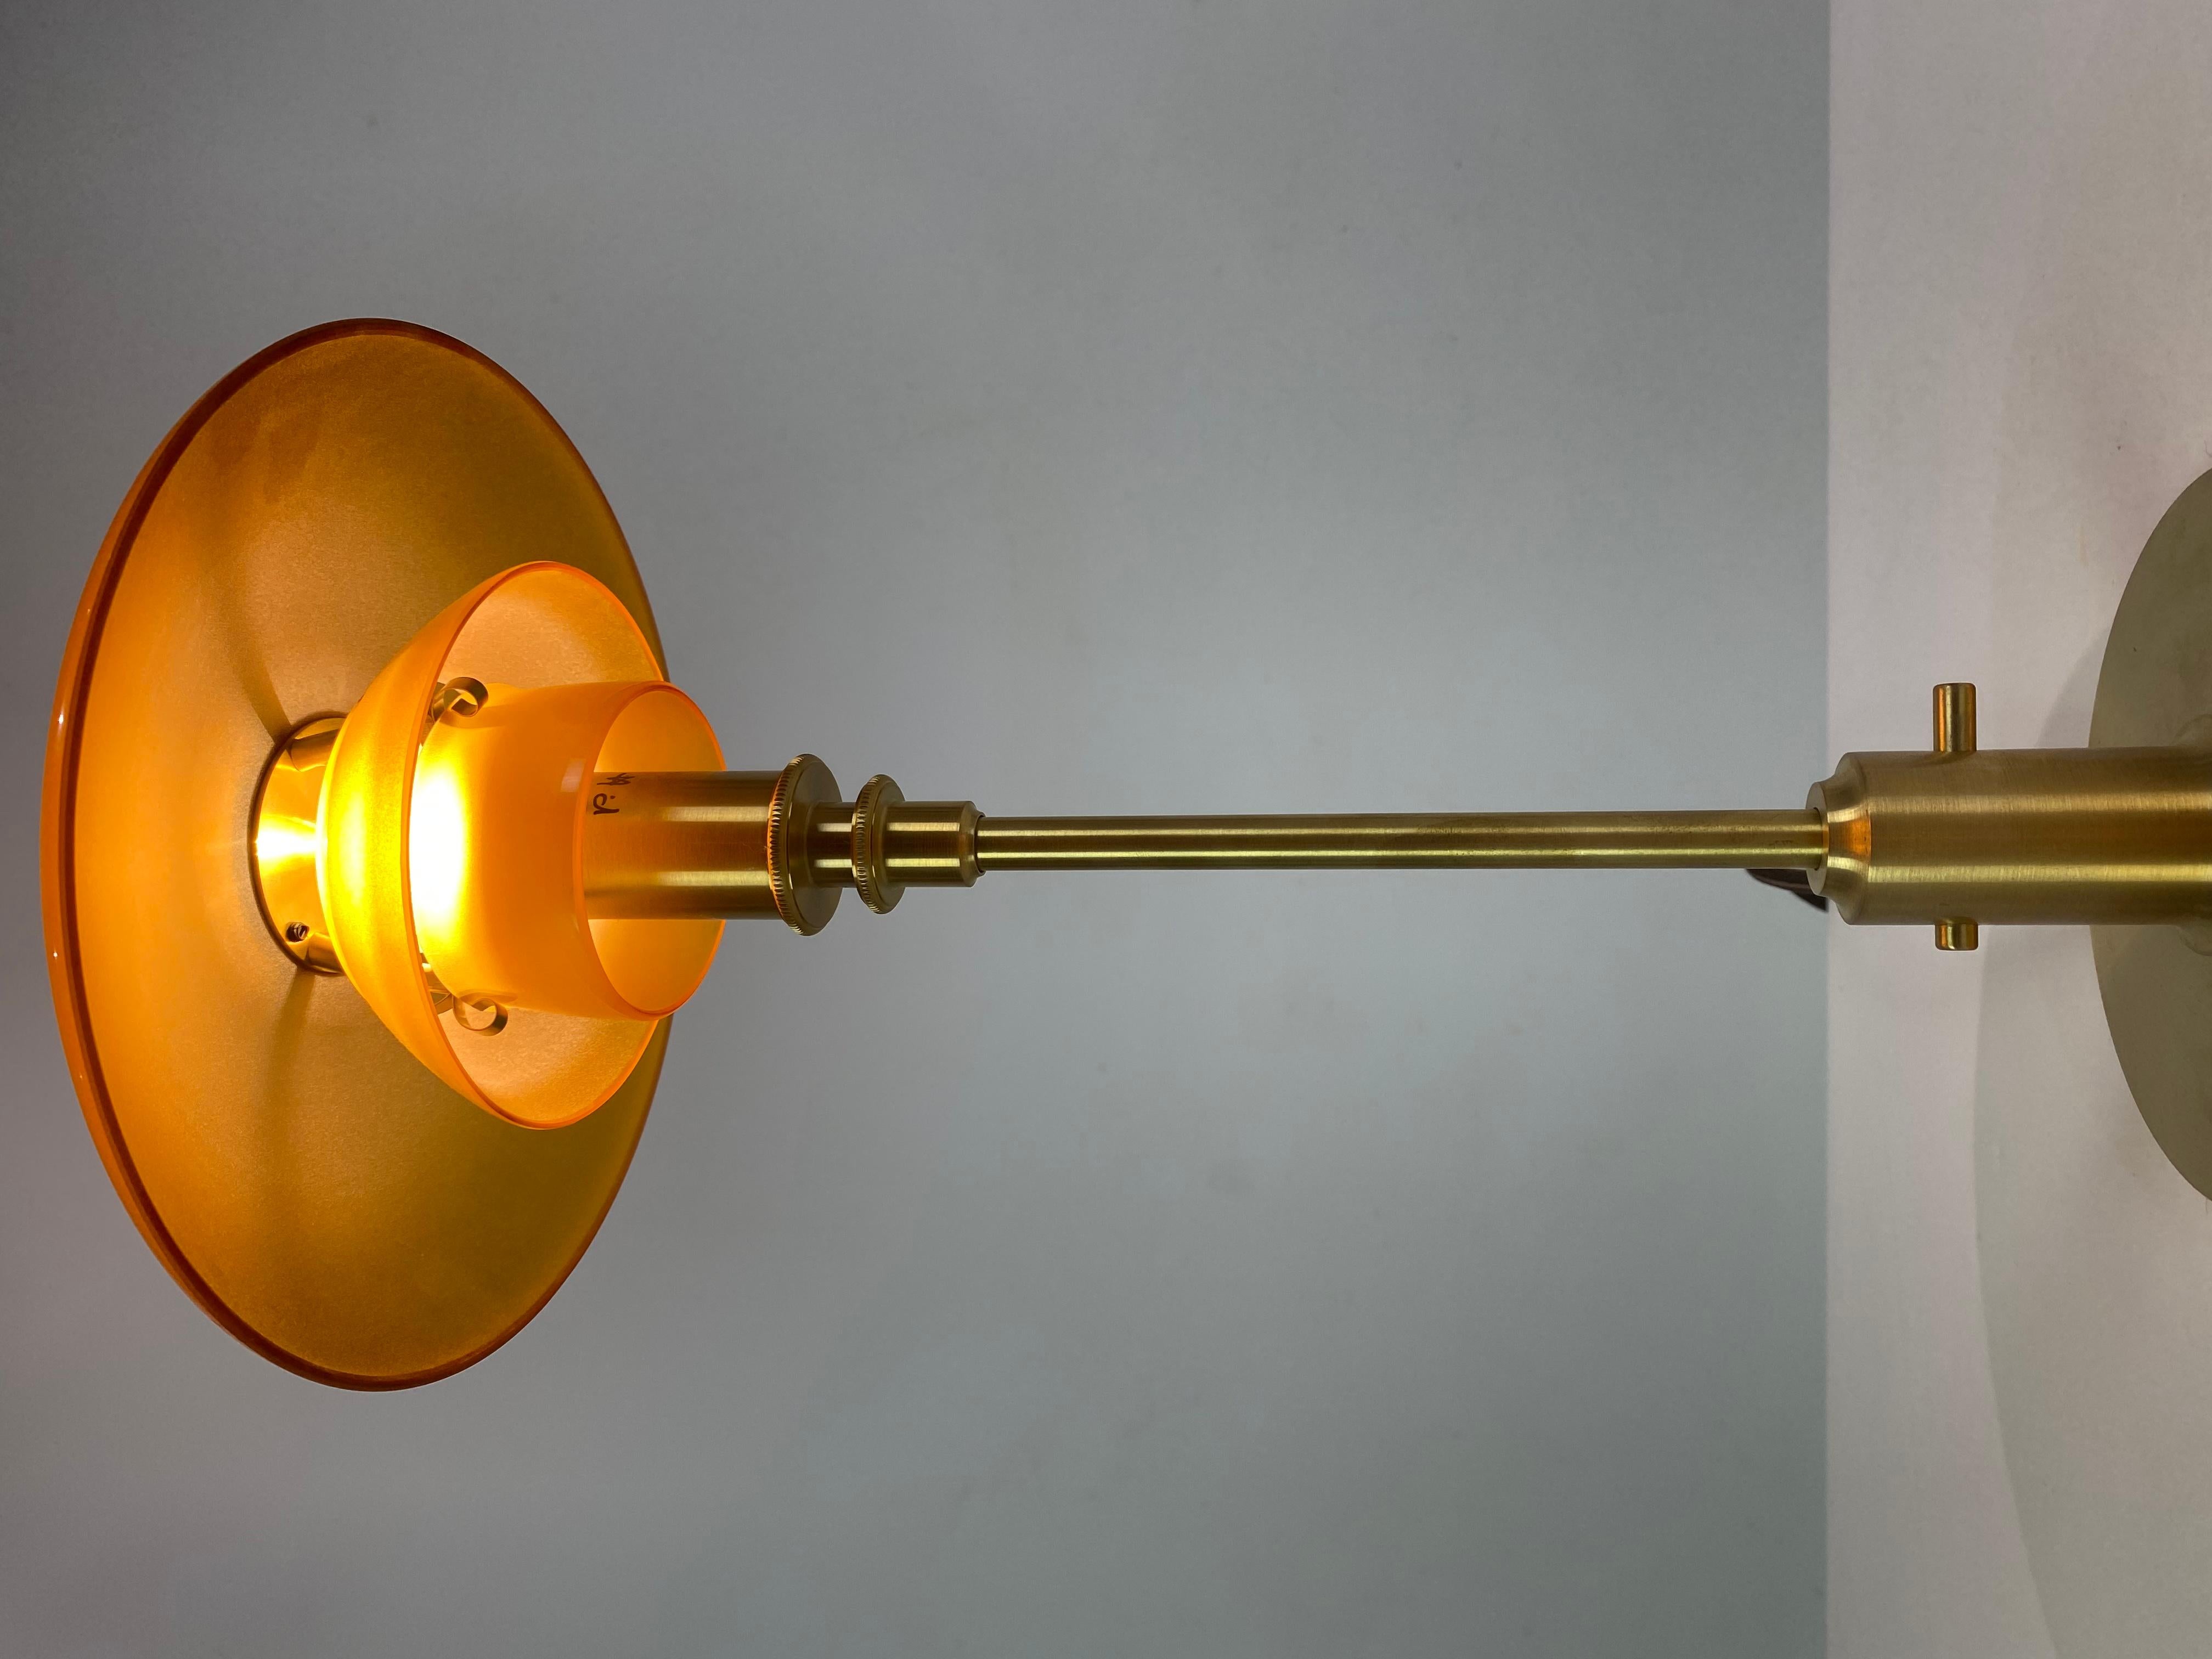 Limited edition 2018 PH 3/2 tablelamp with frame of brass and amber colored shades by Poul Henningsen and Louis Poulsen. The lamp is in very good condition. As a tribute to Poul Henningsen's ingenious work in shaping light, Louis Poulsen now